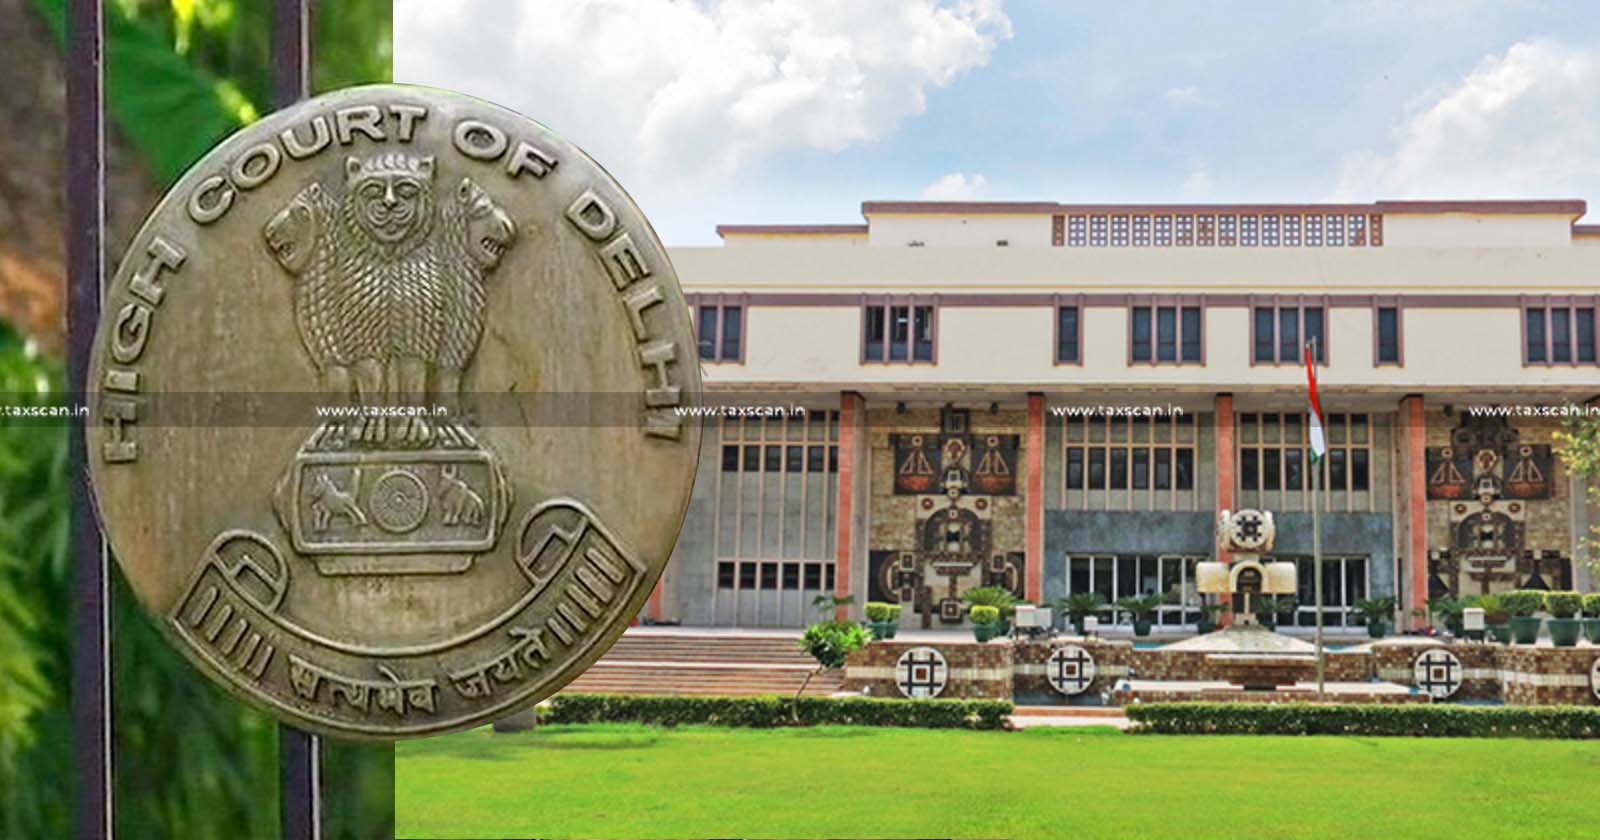 Delay in Filing Reply to Income Tax Notice - Delay - Income Tax Notice - Income Tax - Incorrect Login Password - Assessment Order - Delhi High Court - taxscan